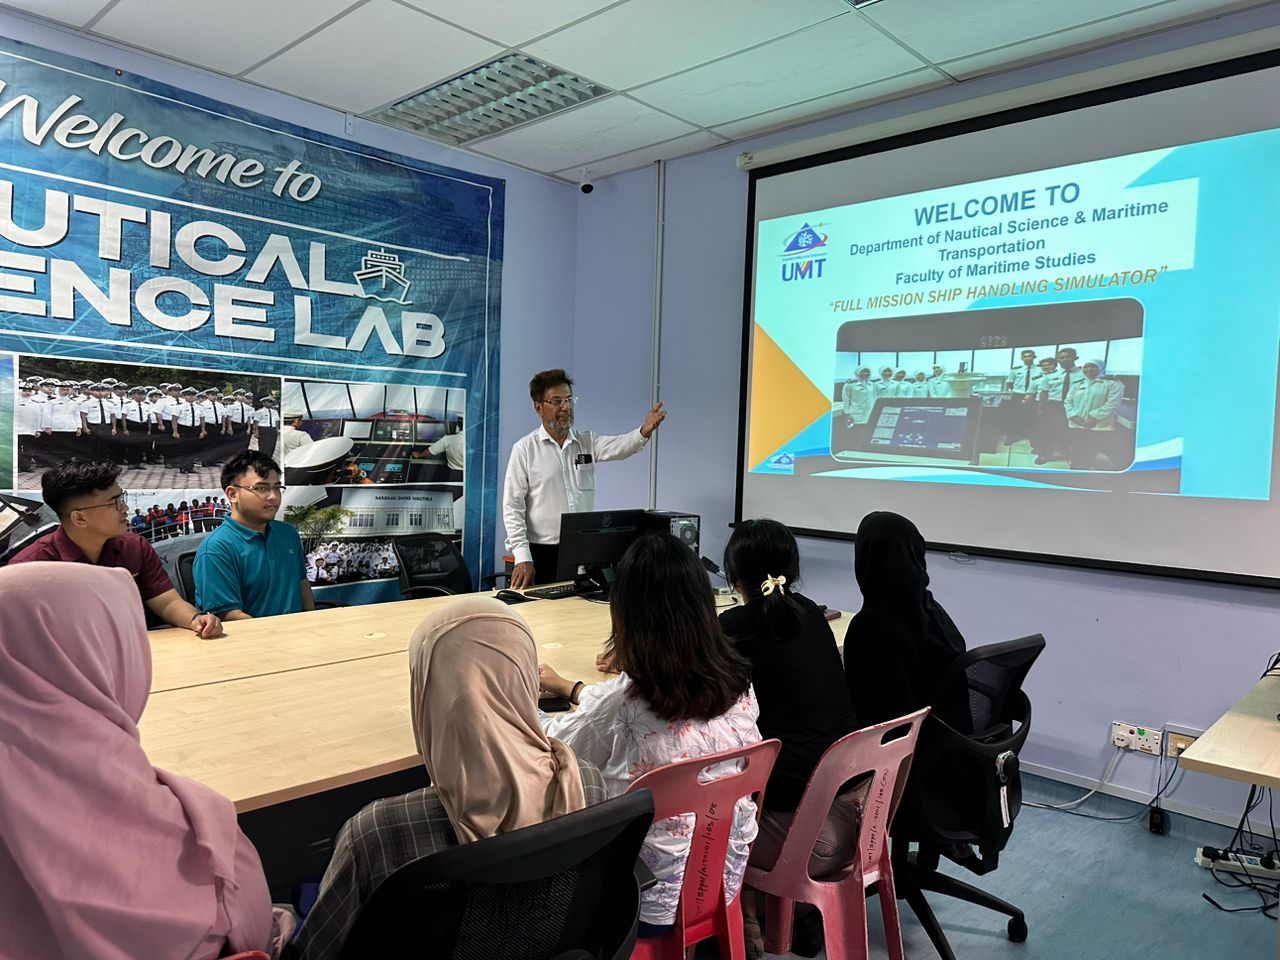 Student Mobility and Fieldwork Program by Analytical and Environmental Chemistry, Universiti Malaysia Terengganu 2023